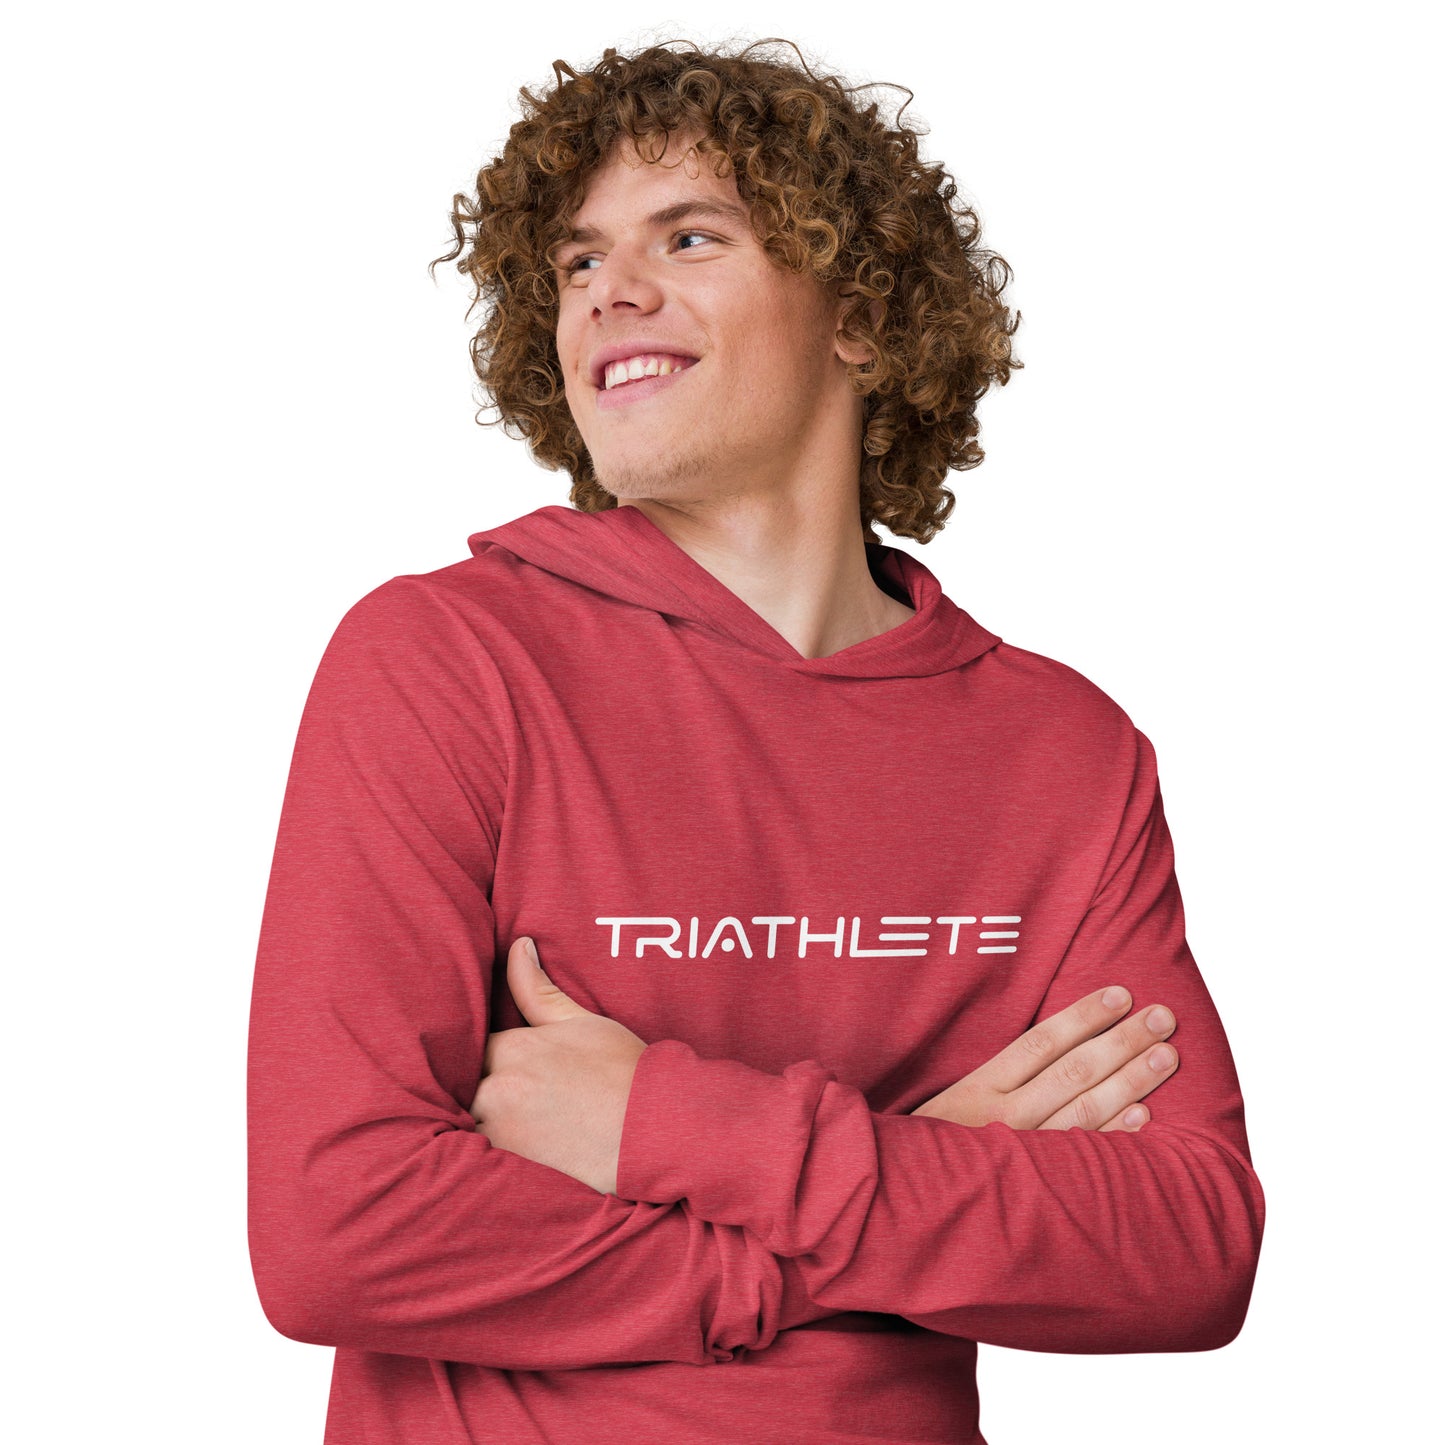 Ready For Takeoff Triathlete Hooded long-sleeve tee - White